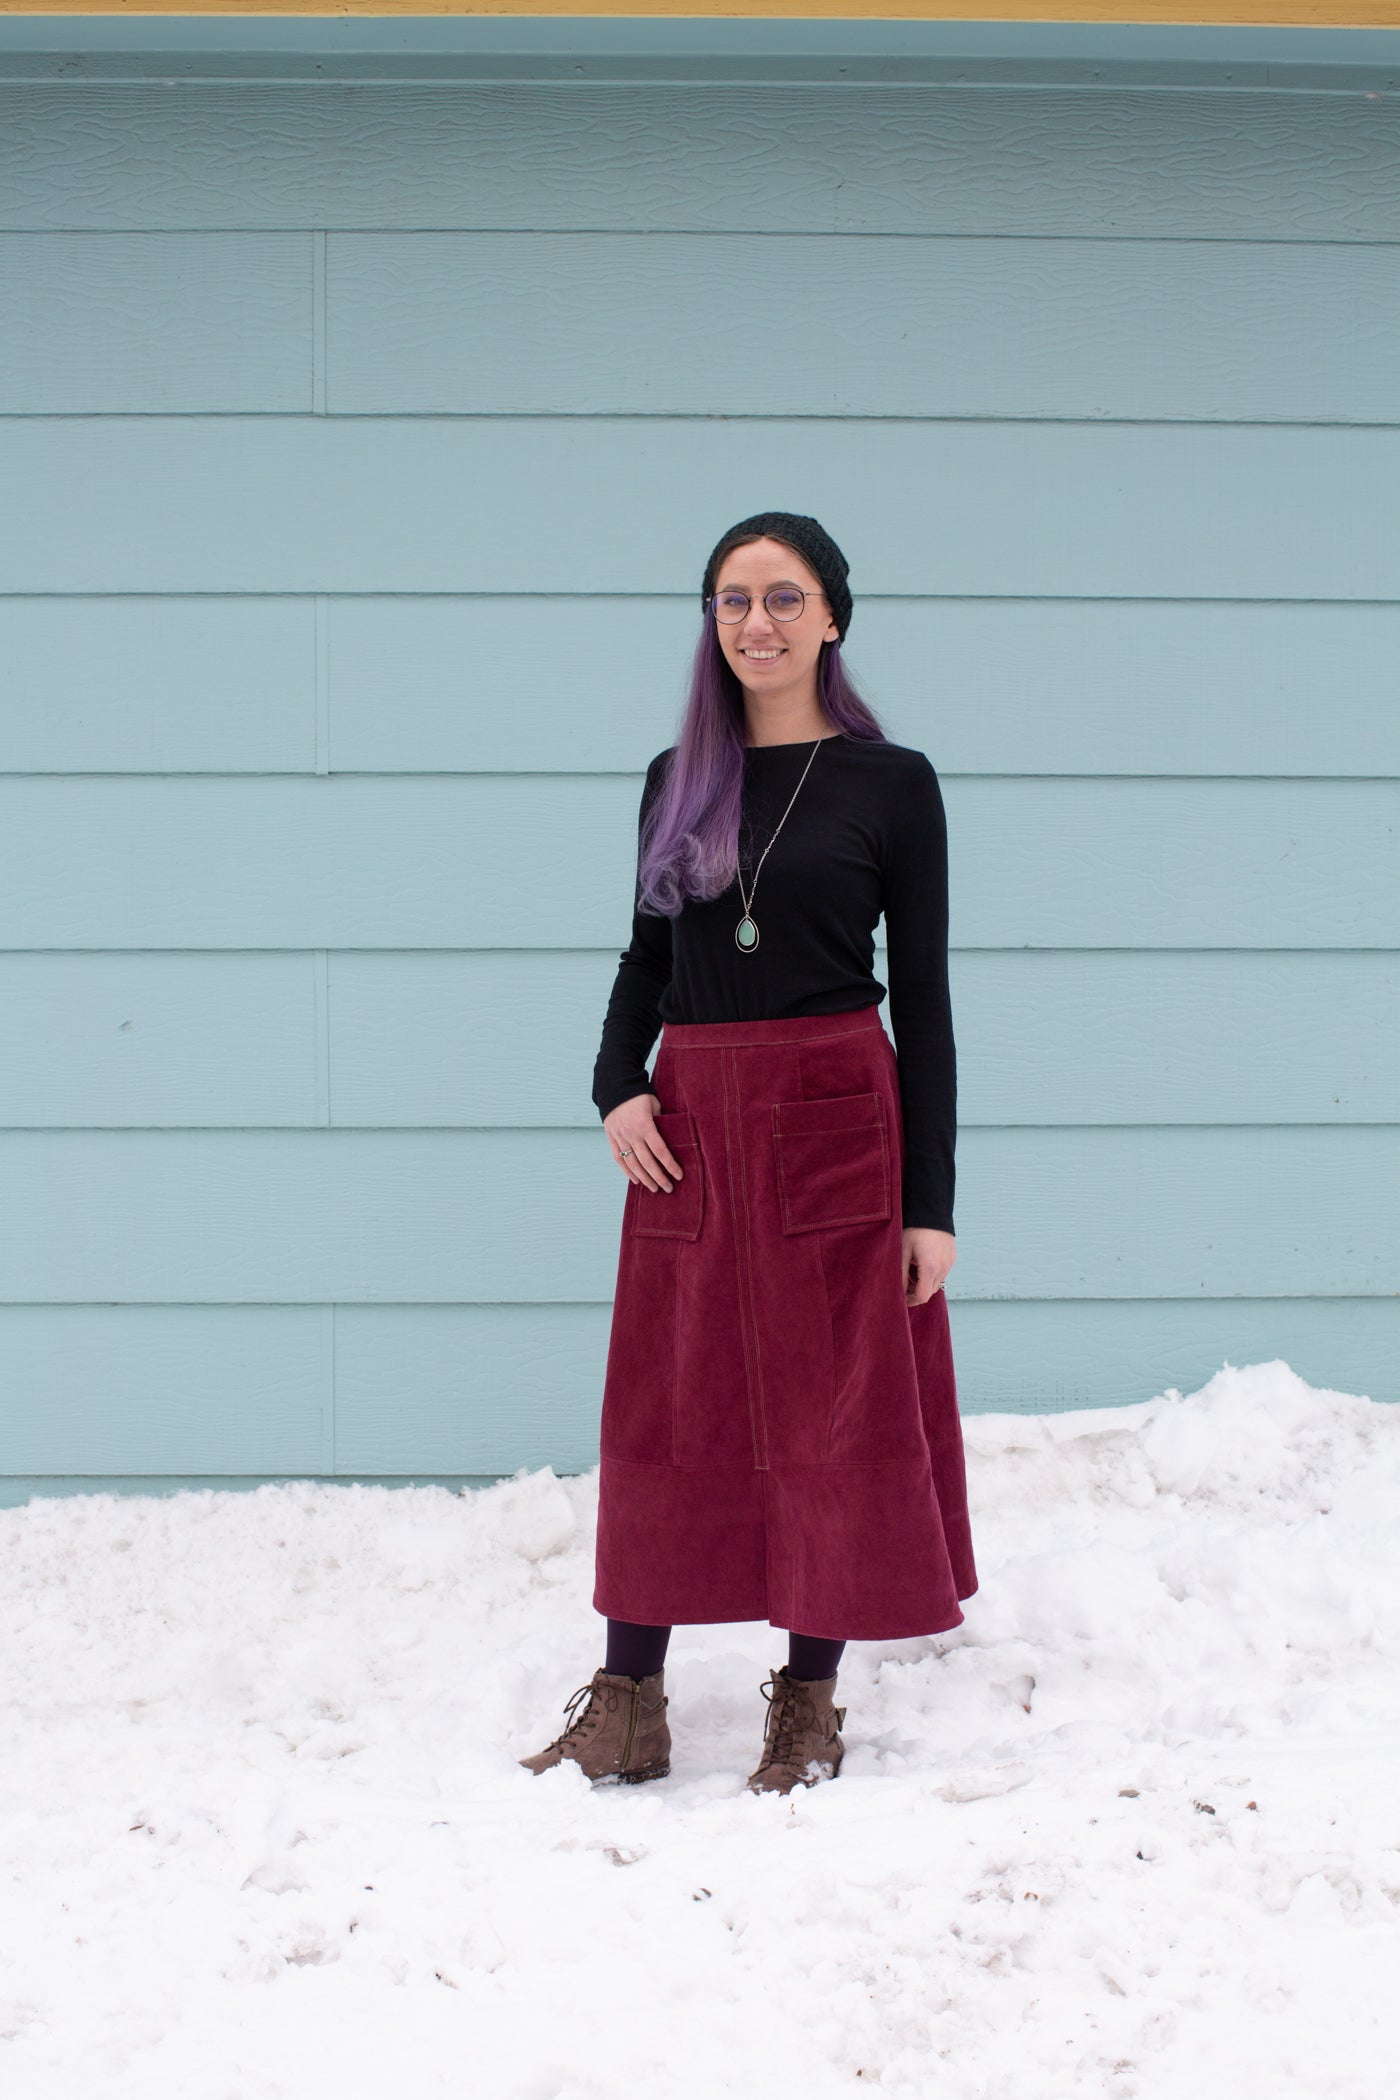 Aly standing in snow against a sea blue wall wearing a Reed Skirt in merlot corduroy and black long sleeve top.